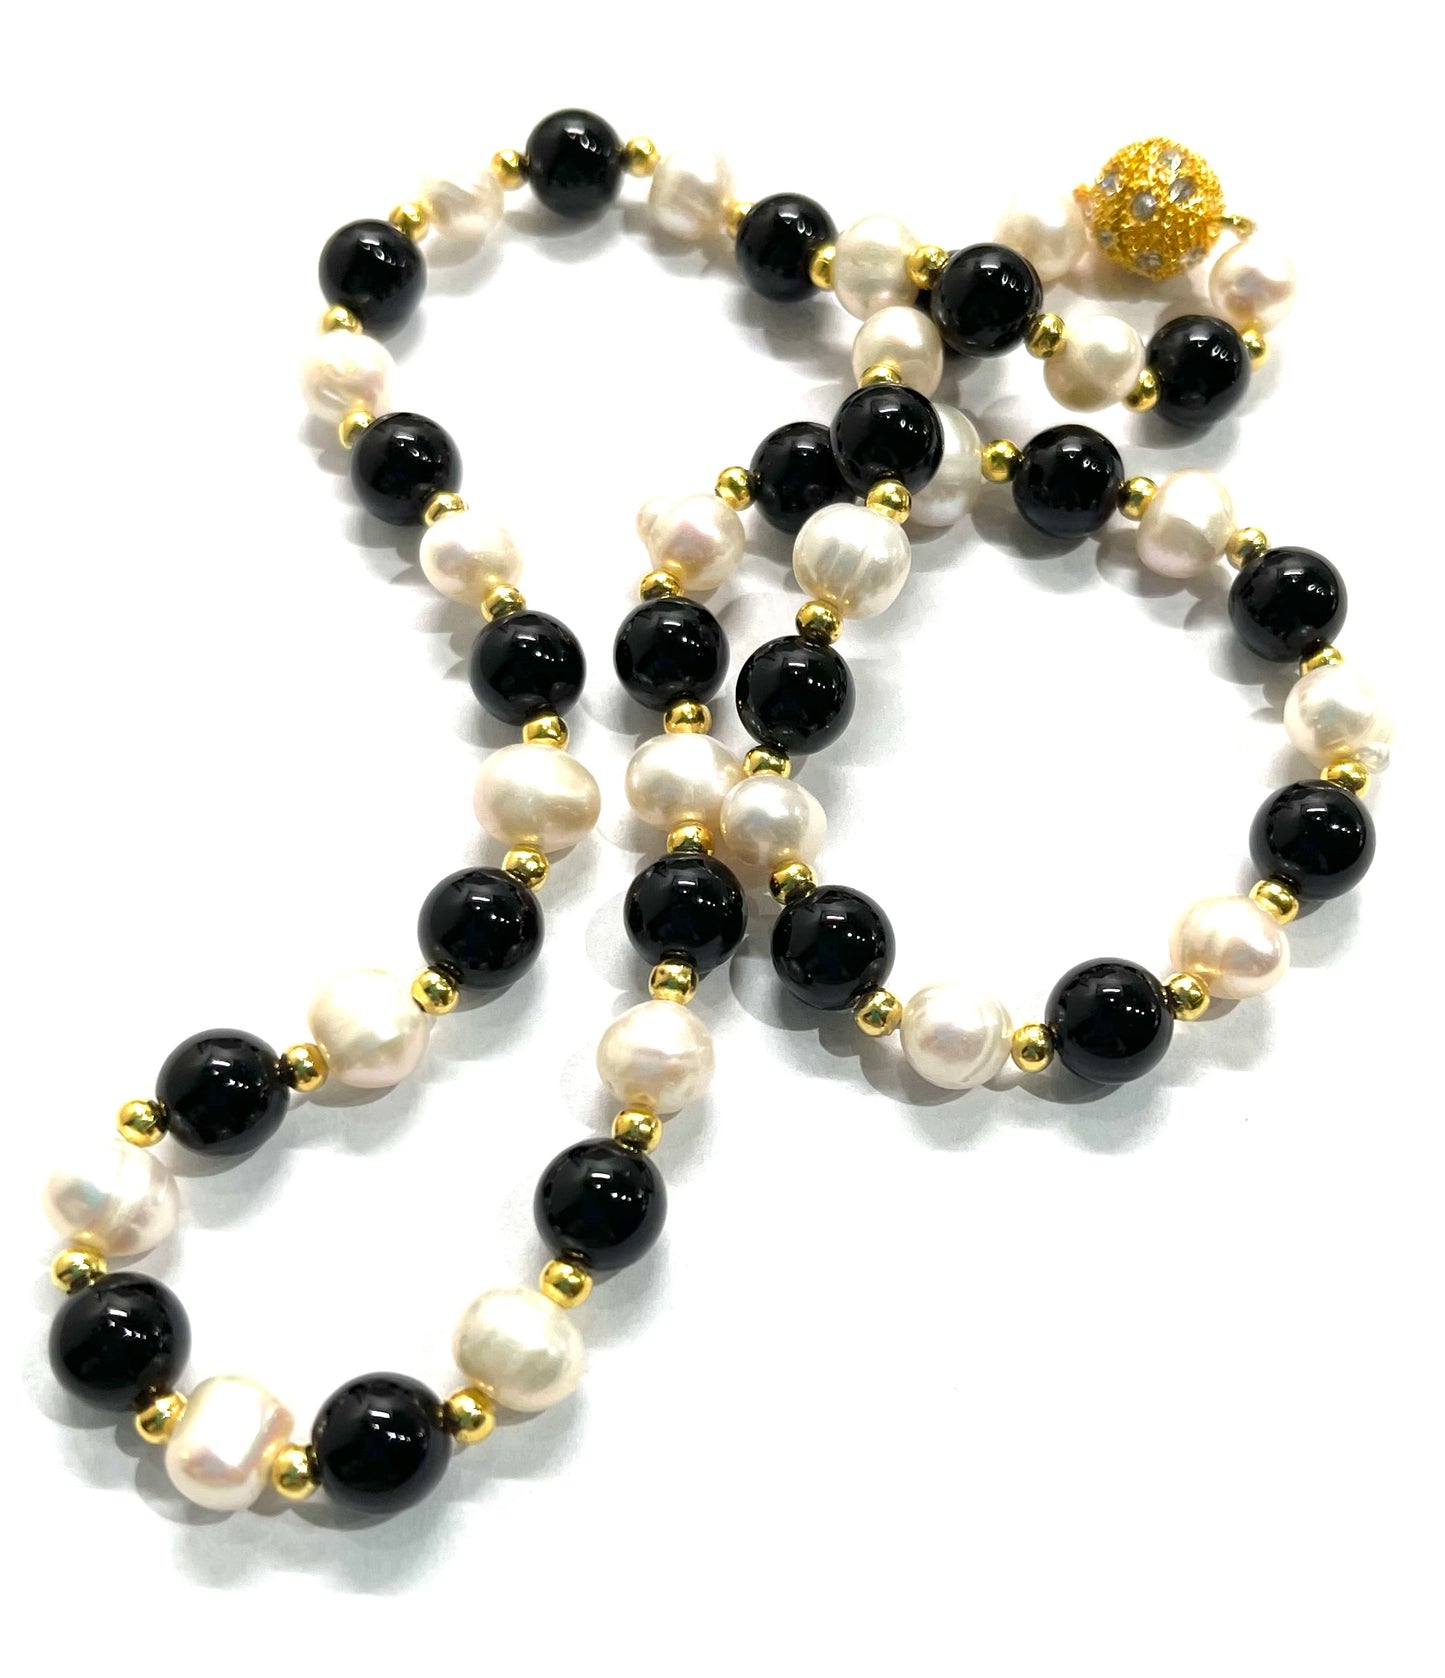 Dainty Black Onyx and Freshwater Pearl Gemstone Necklace 18”